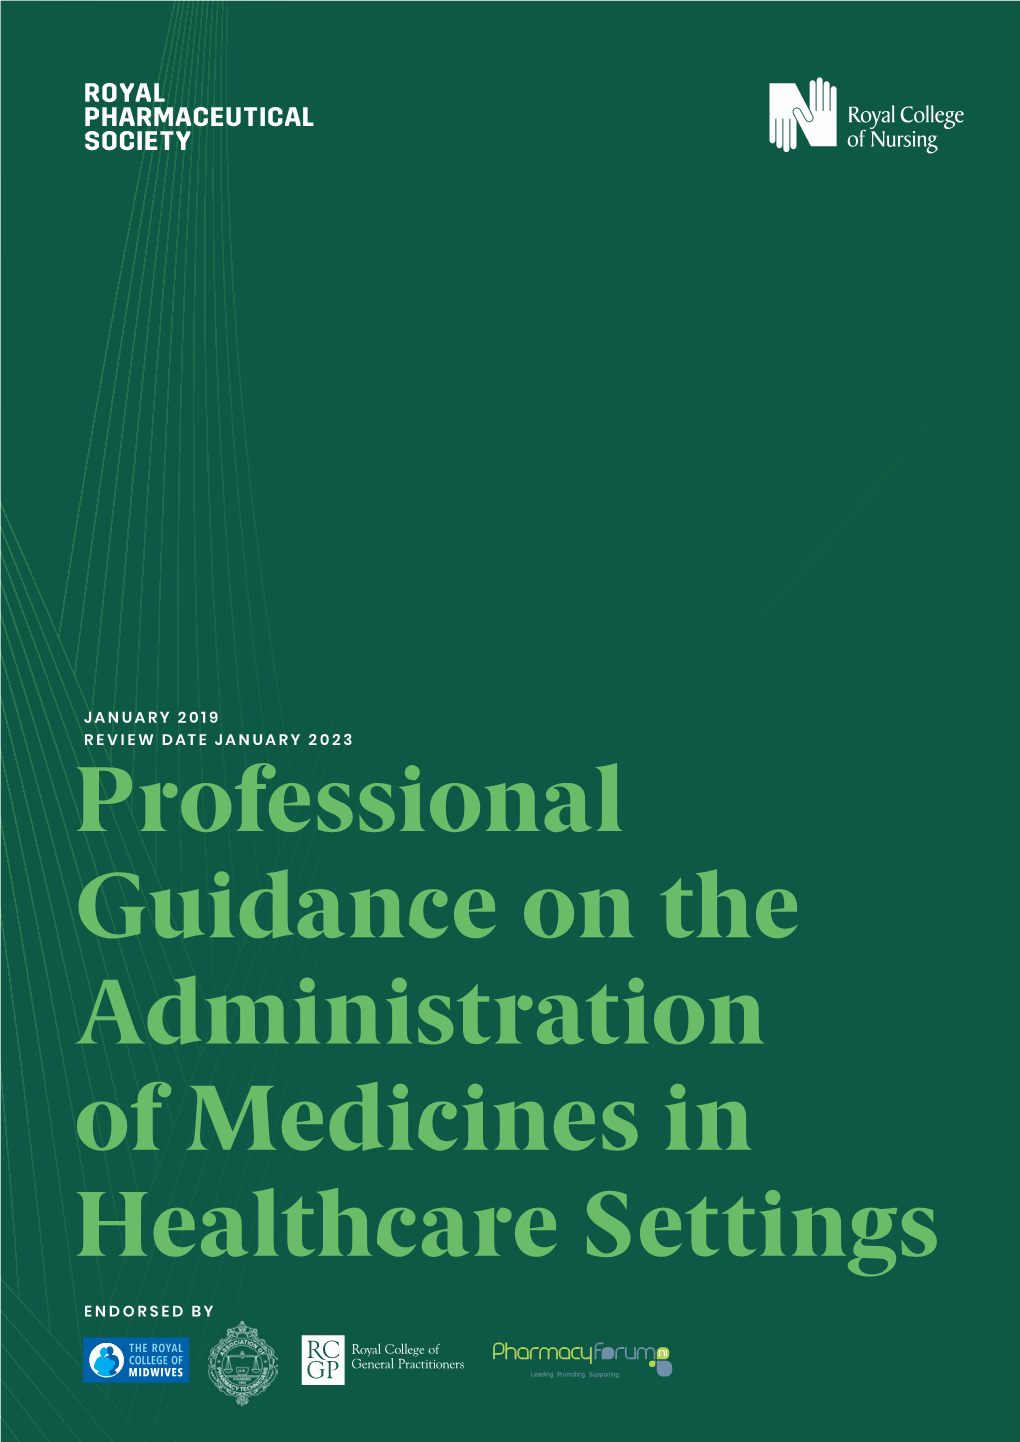 Professional Guidance on the Administration of Medicines in Healthcare Settings